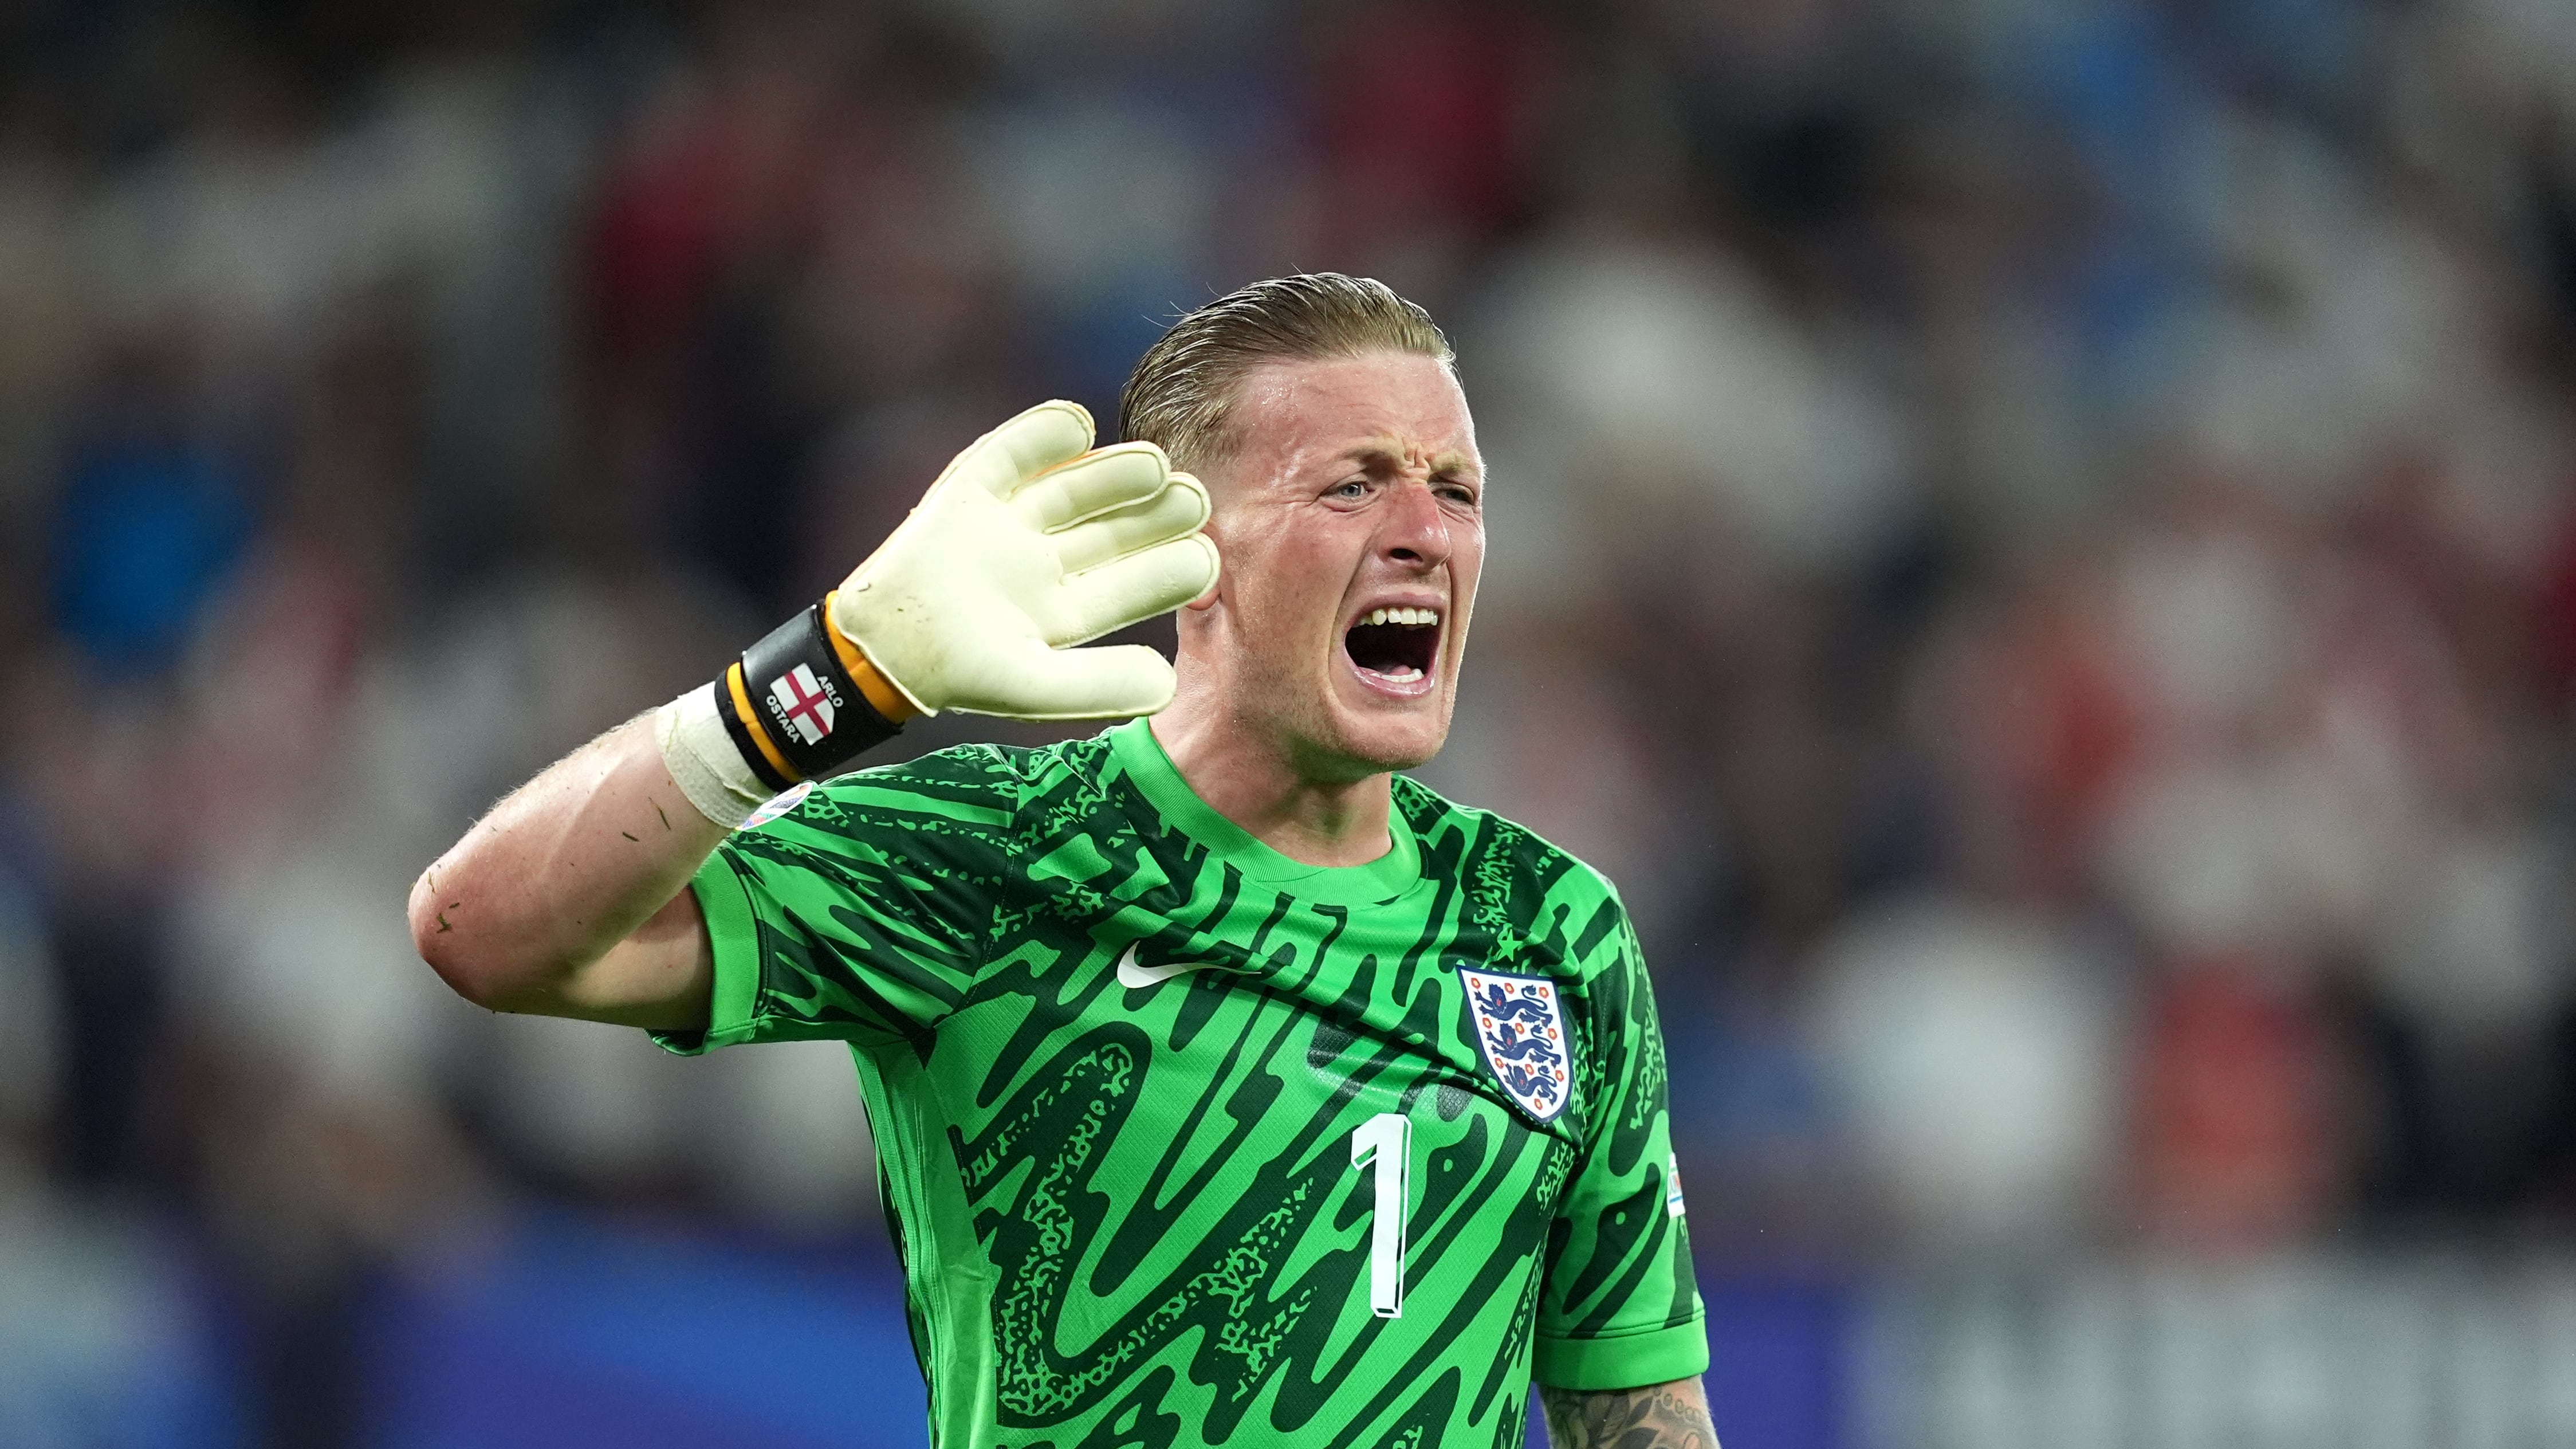 Jordan Pickford says the England camp is ‘chilled’ despite recent poor performances